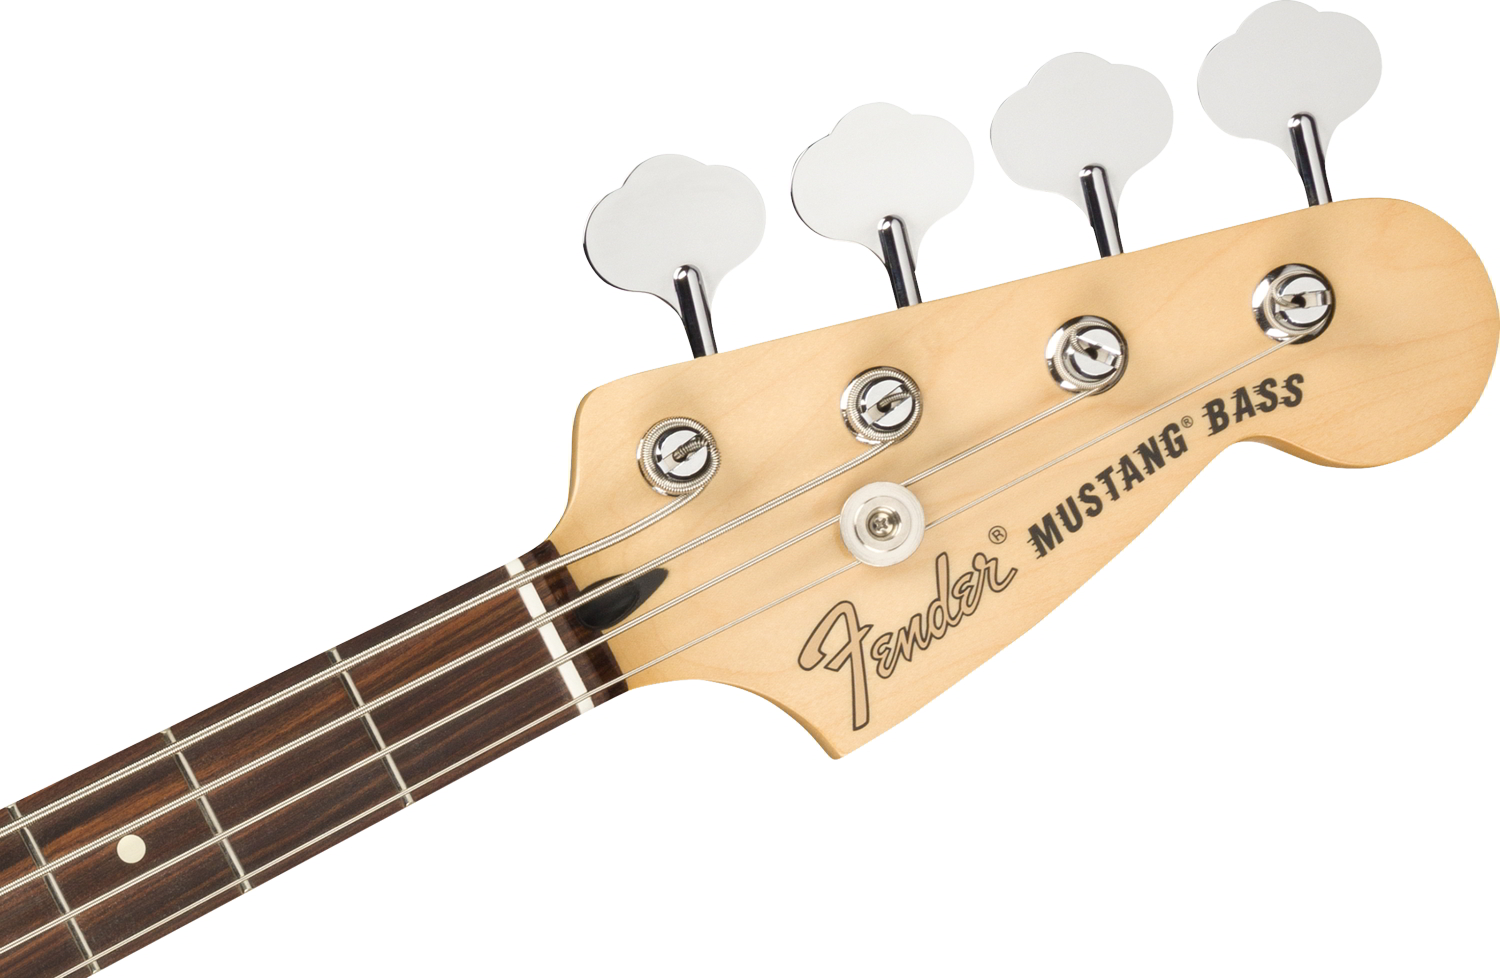 Player Mustang Bass PJ Aged Naturalヘッド画像